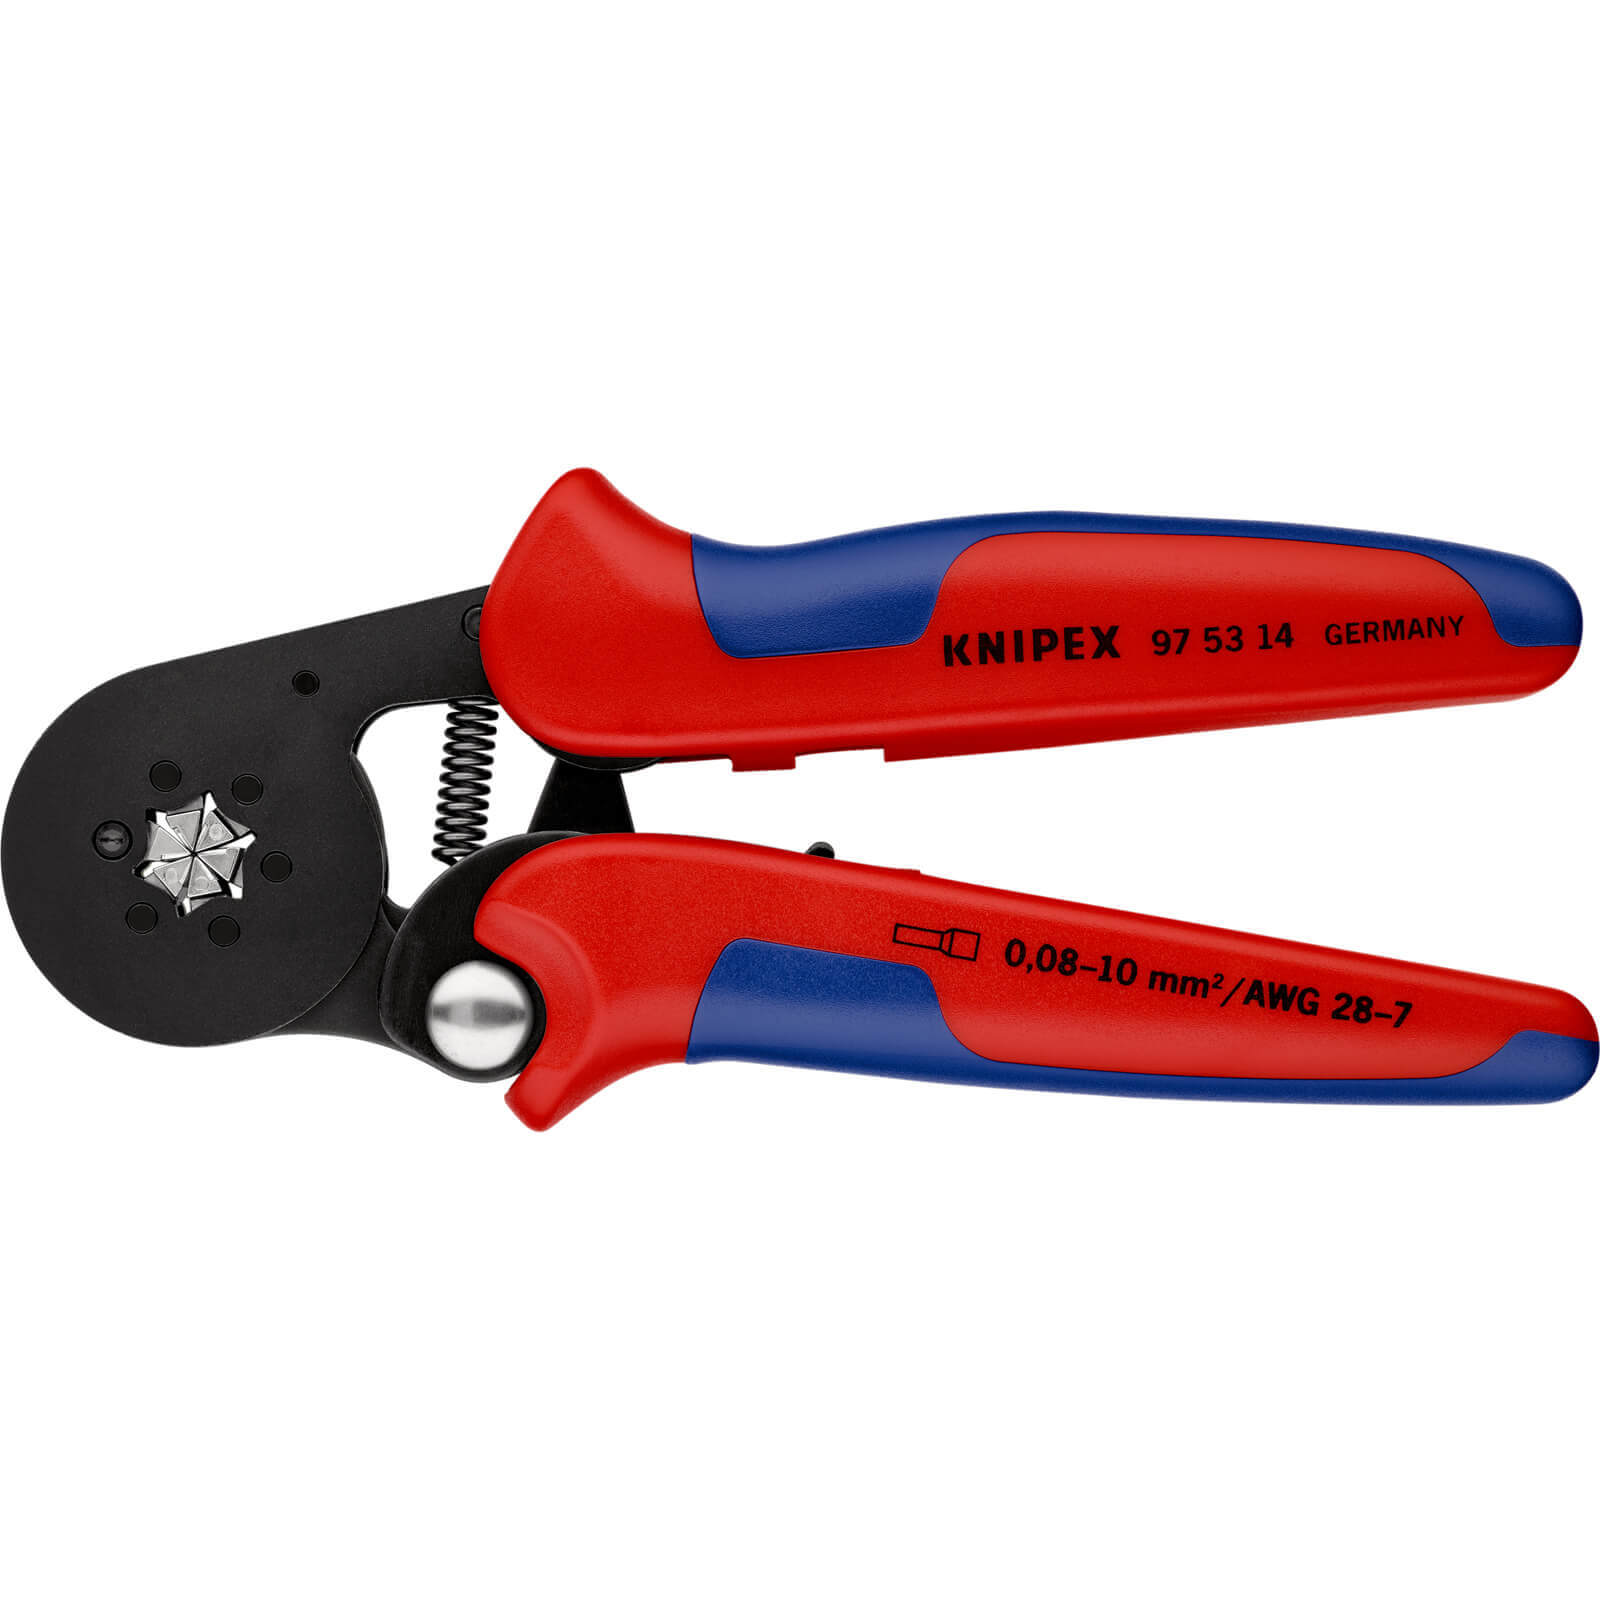 Photo of Knipex 97 53 Lateral Access Self Adjusting Crimping Pliers